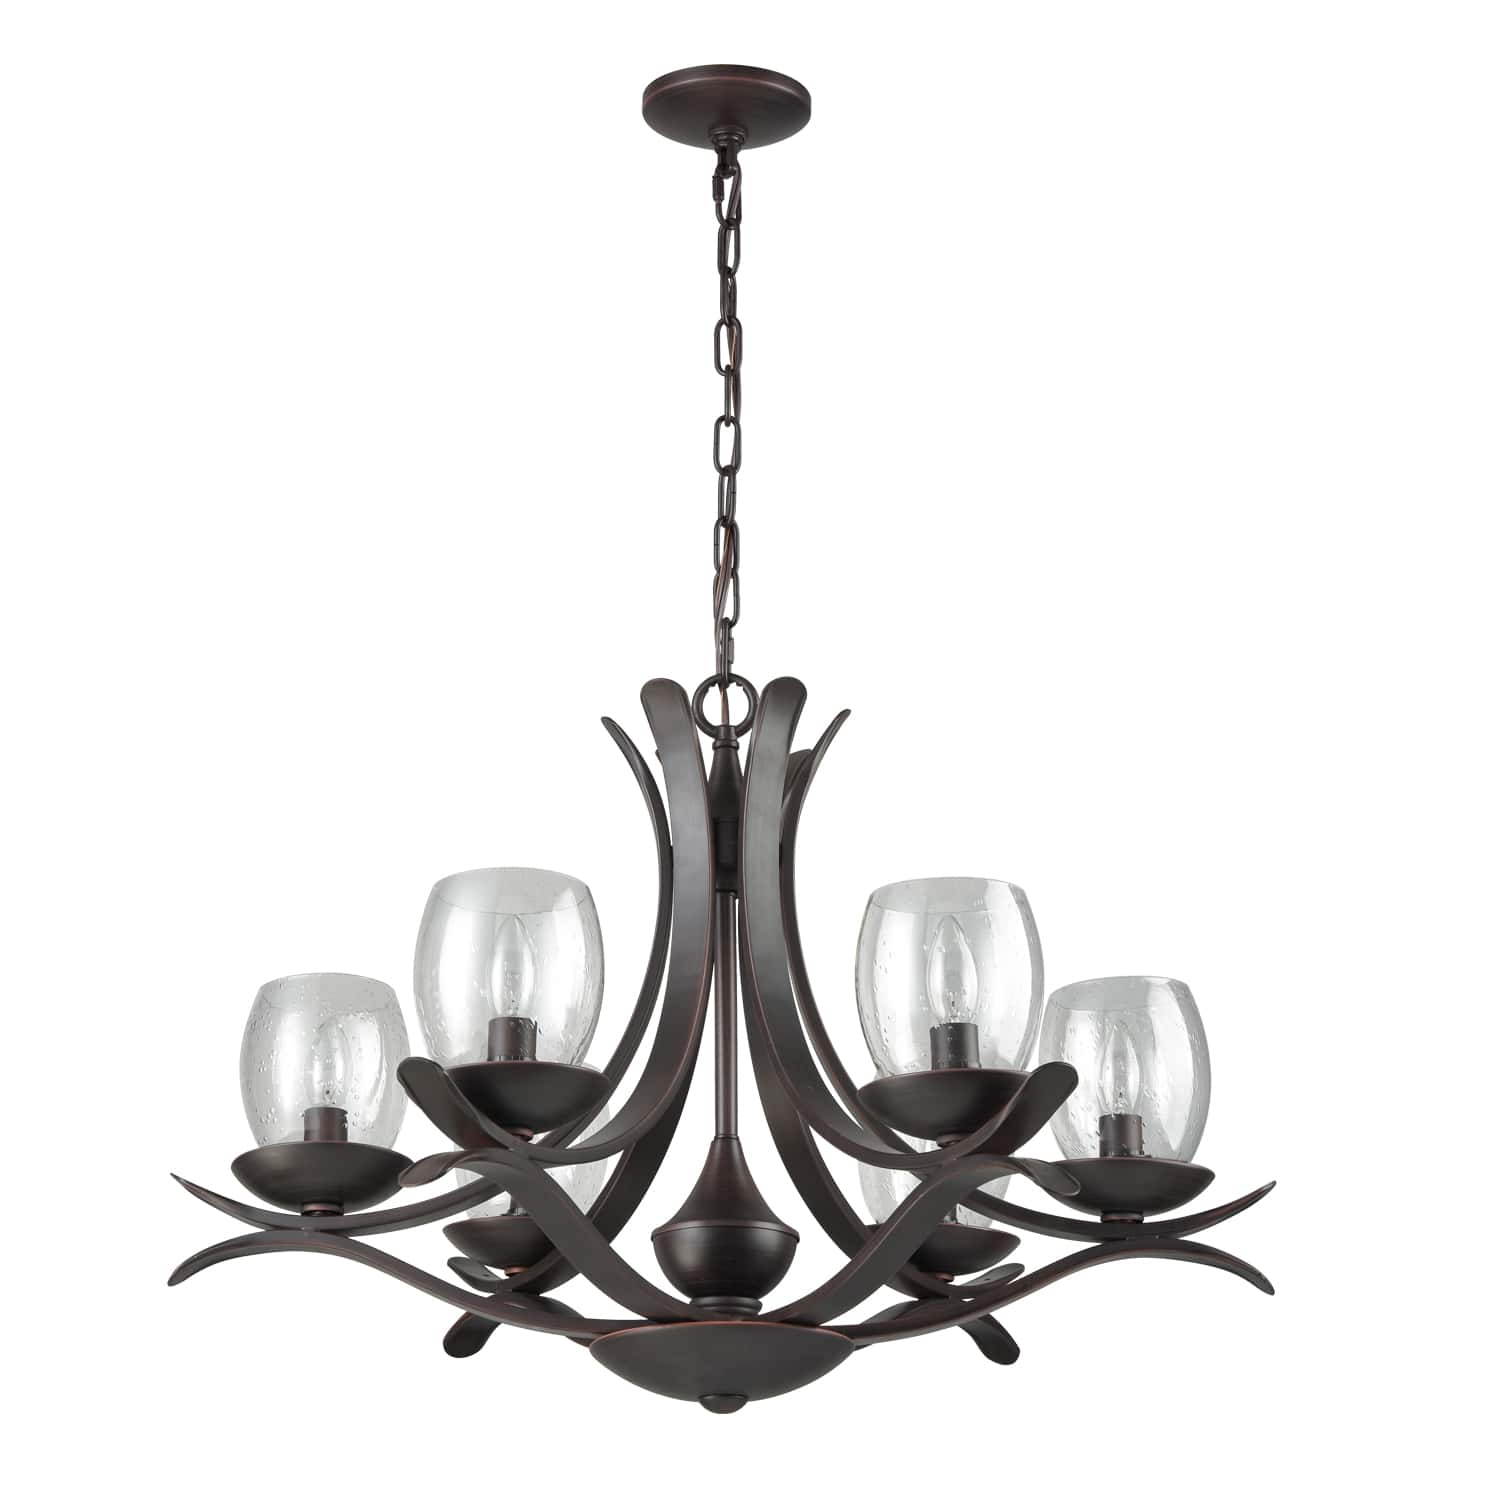 Rustic Bronze Dining Room Chandelier with Seeded Glass - 6 Light